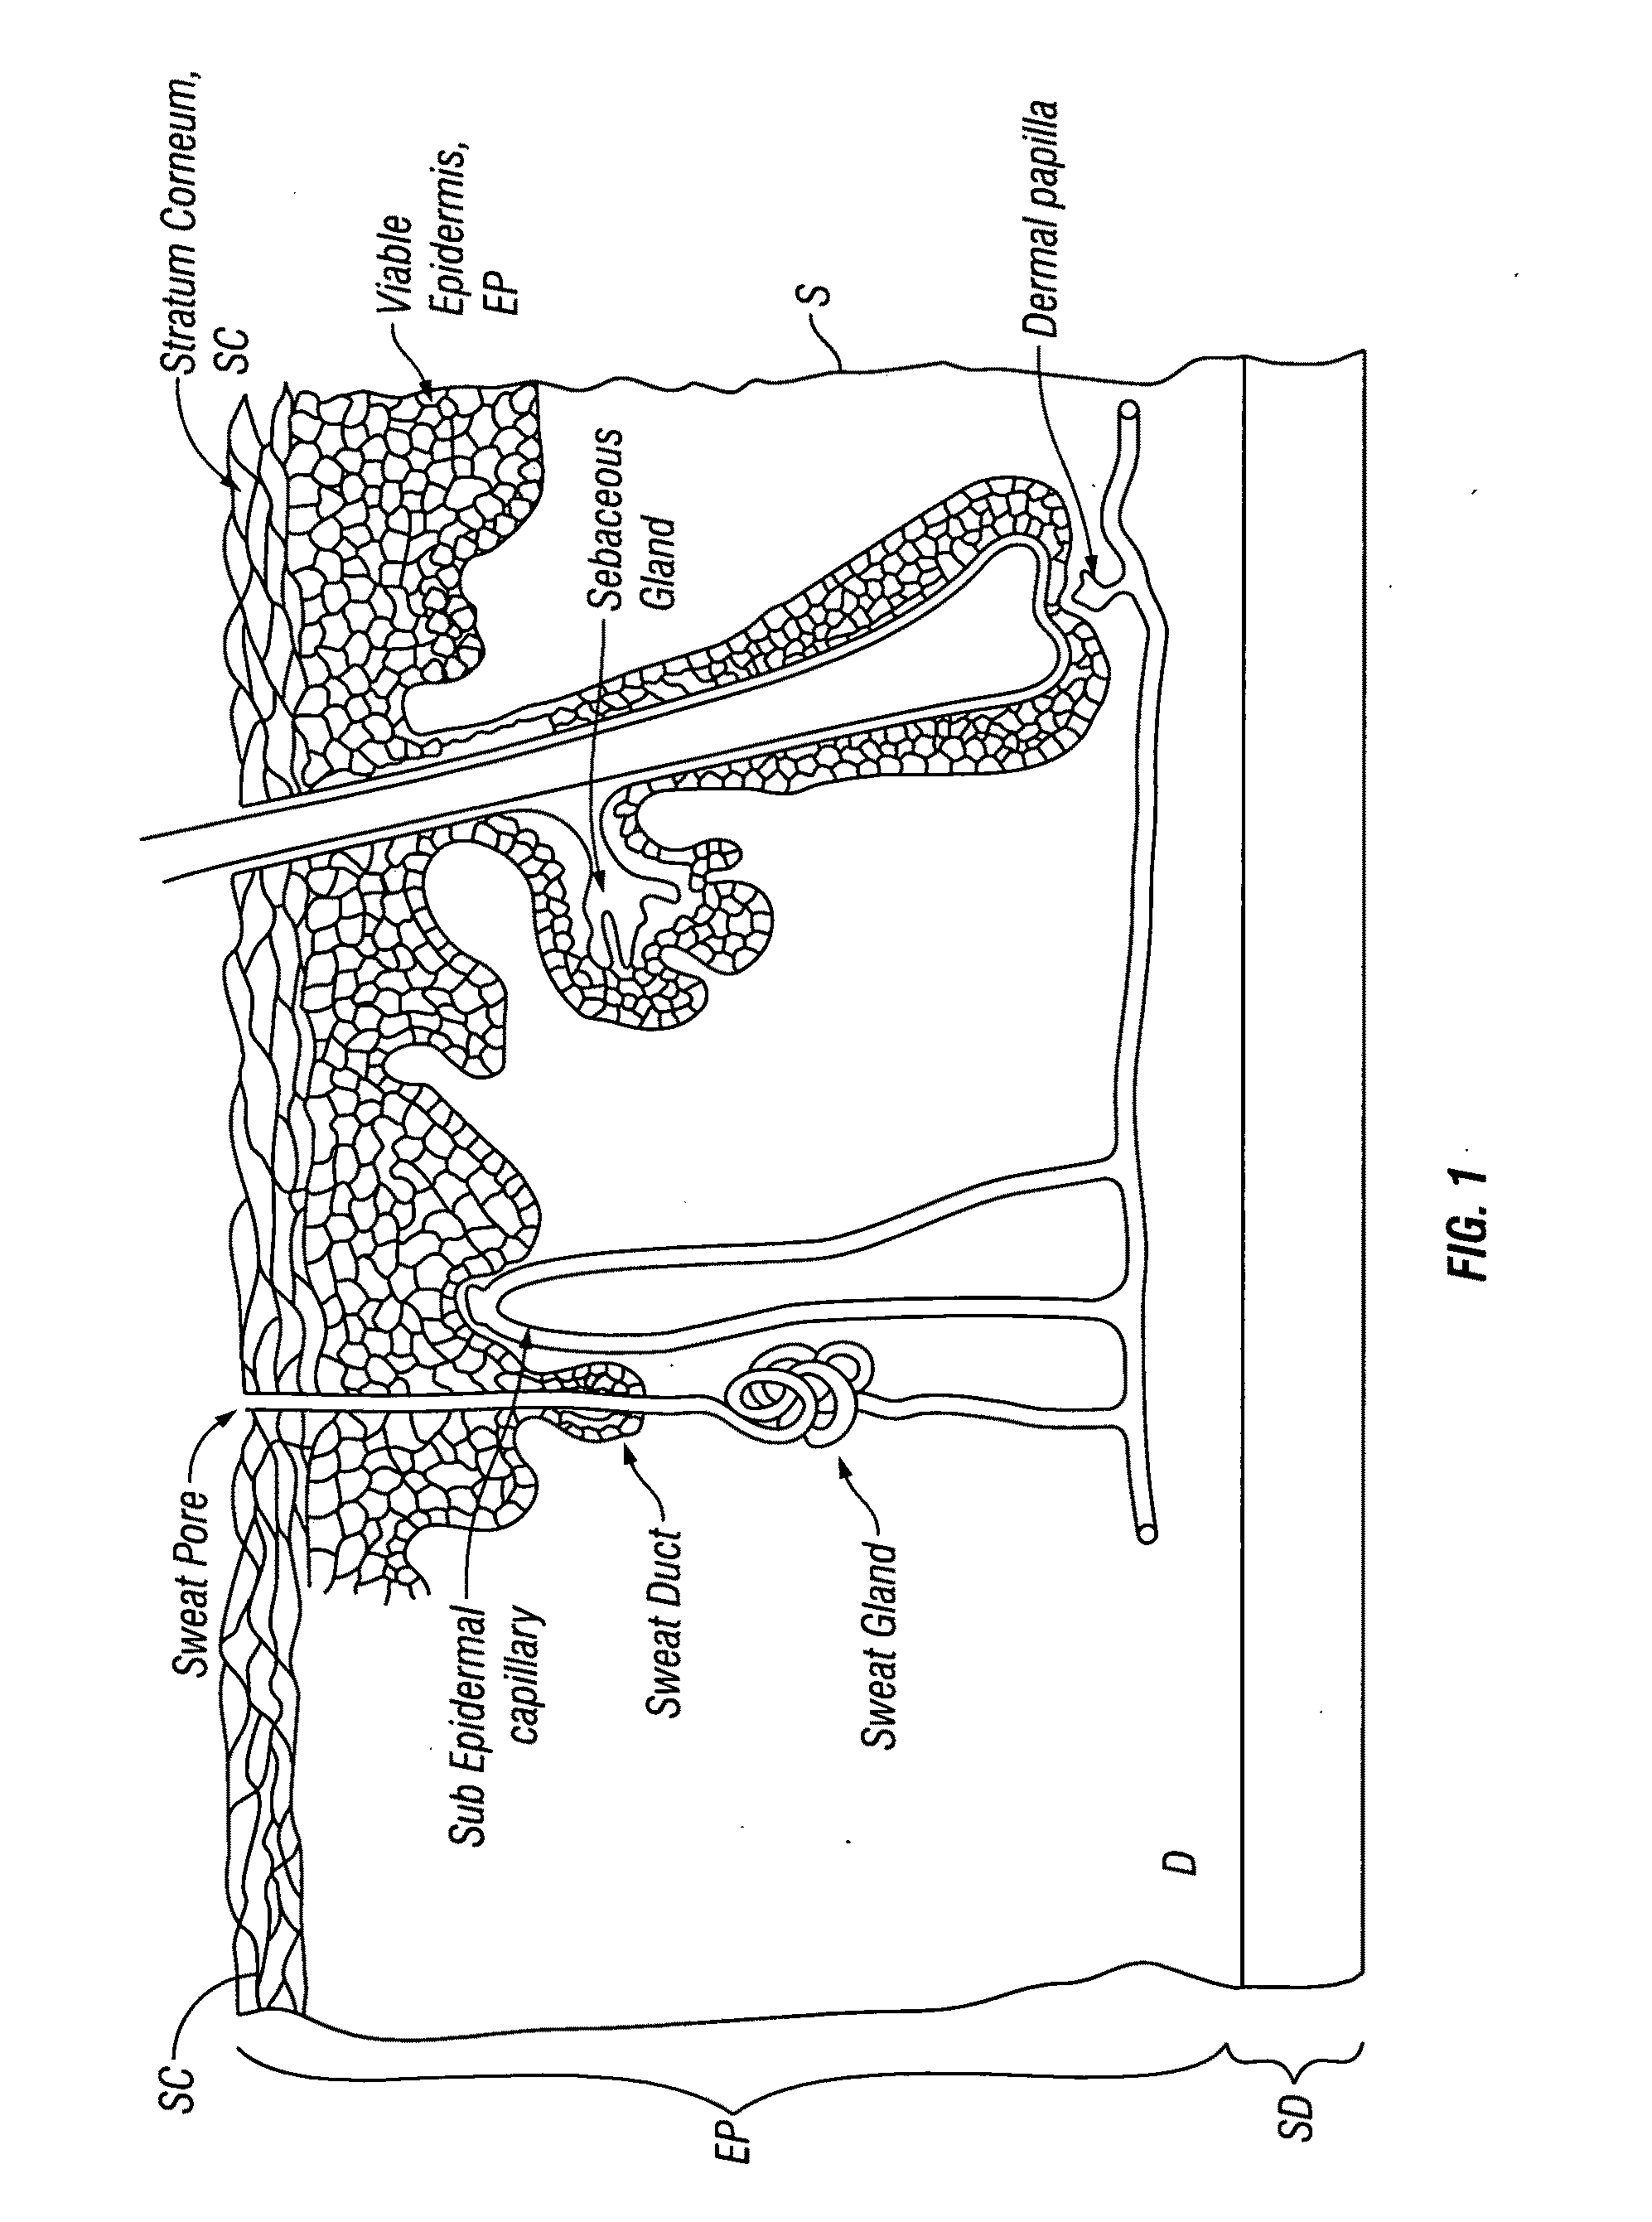 Patches and method for the transdermal delivery of a therapeutically effective amount of iron